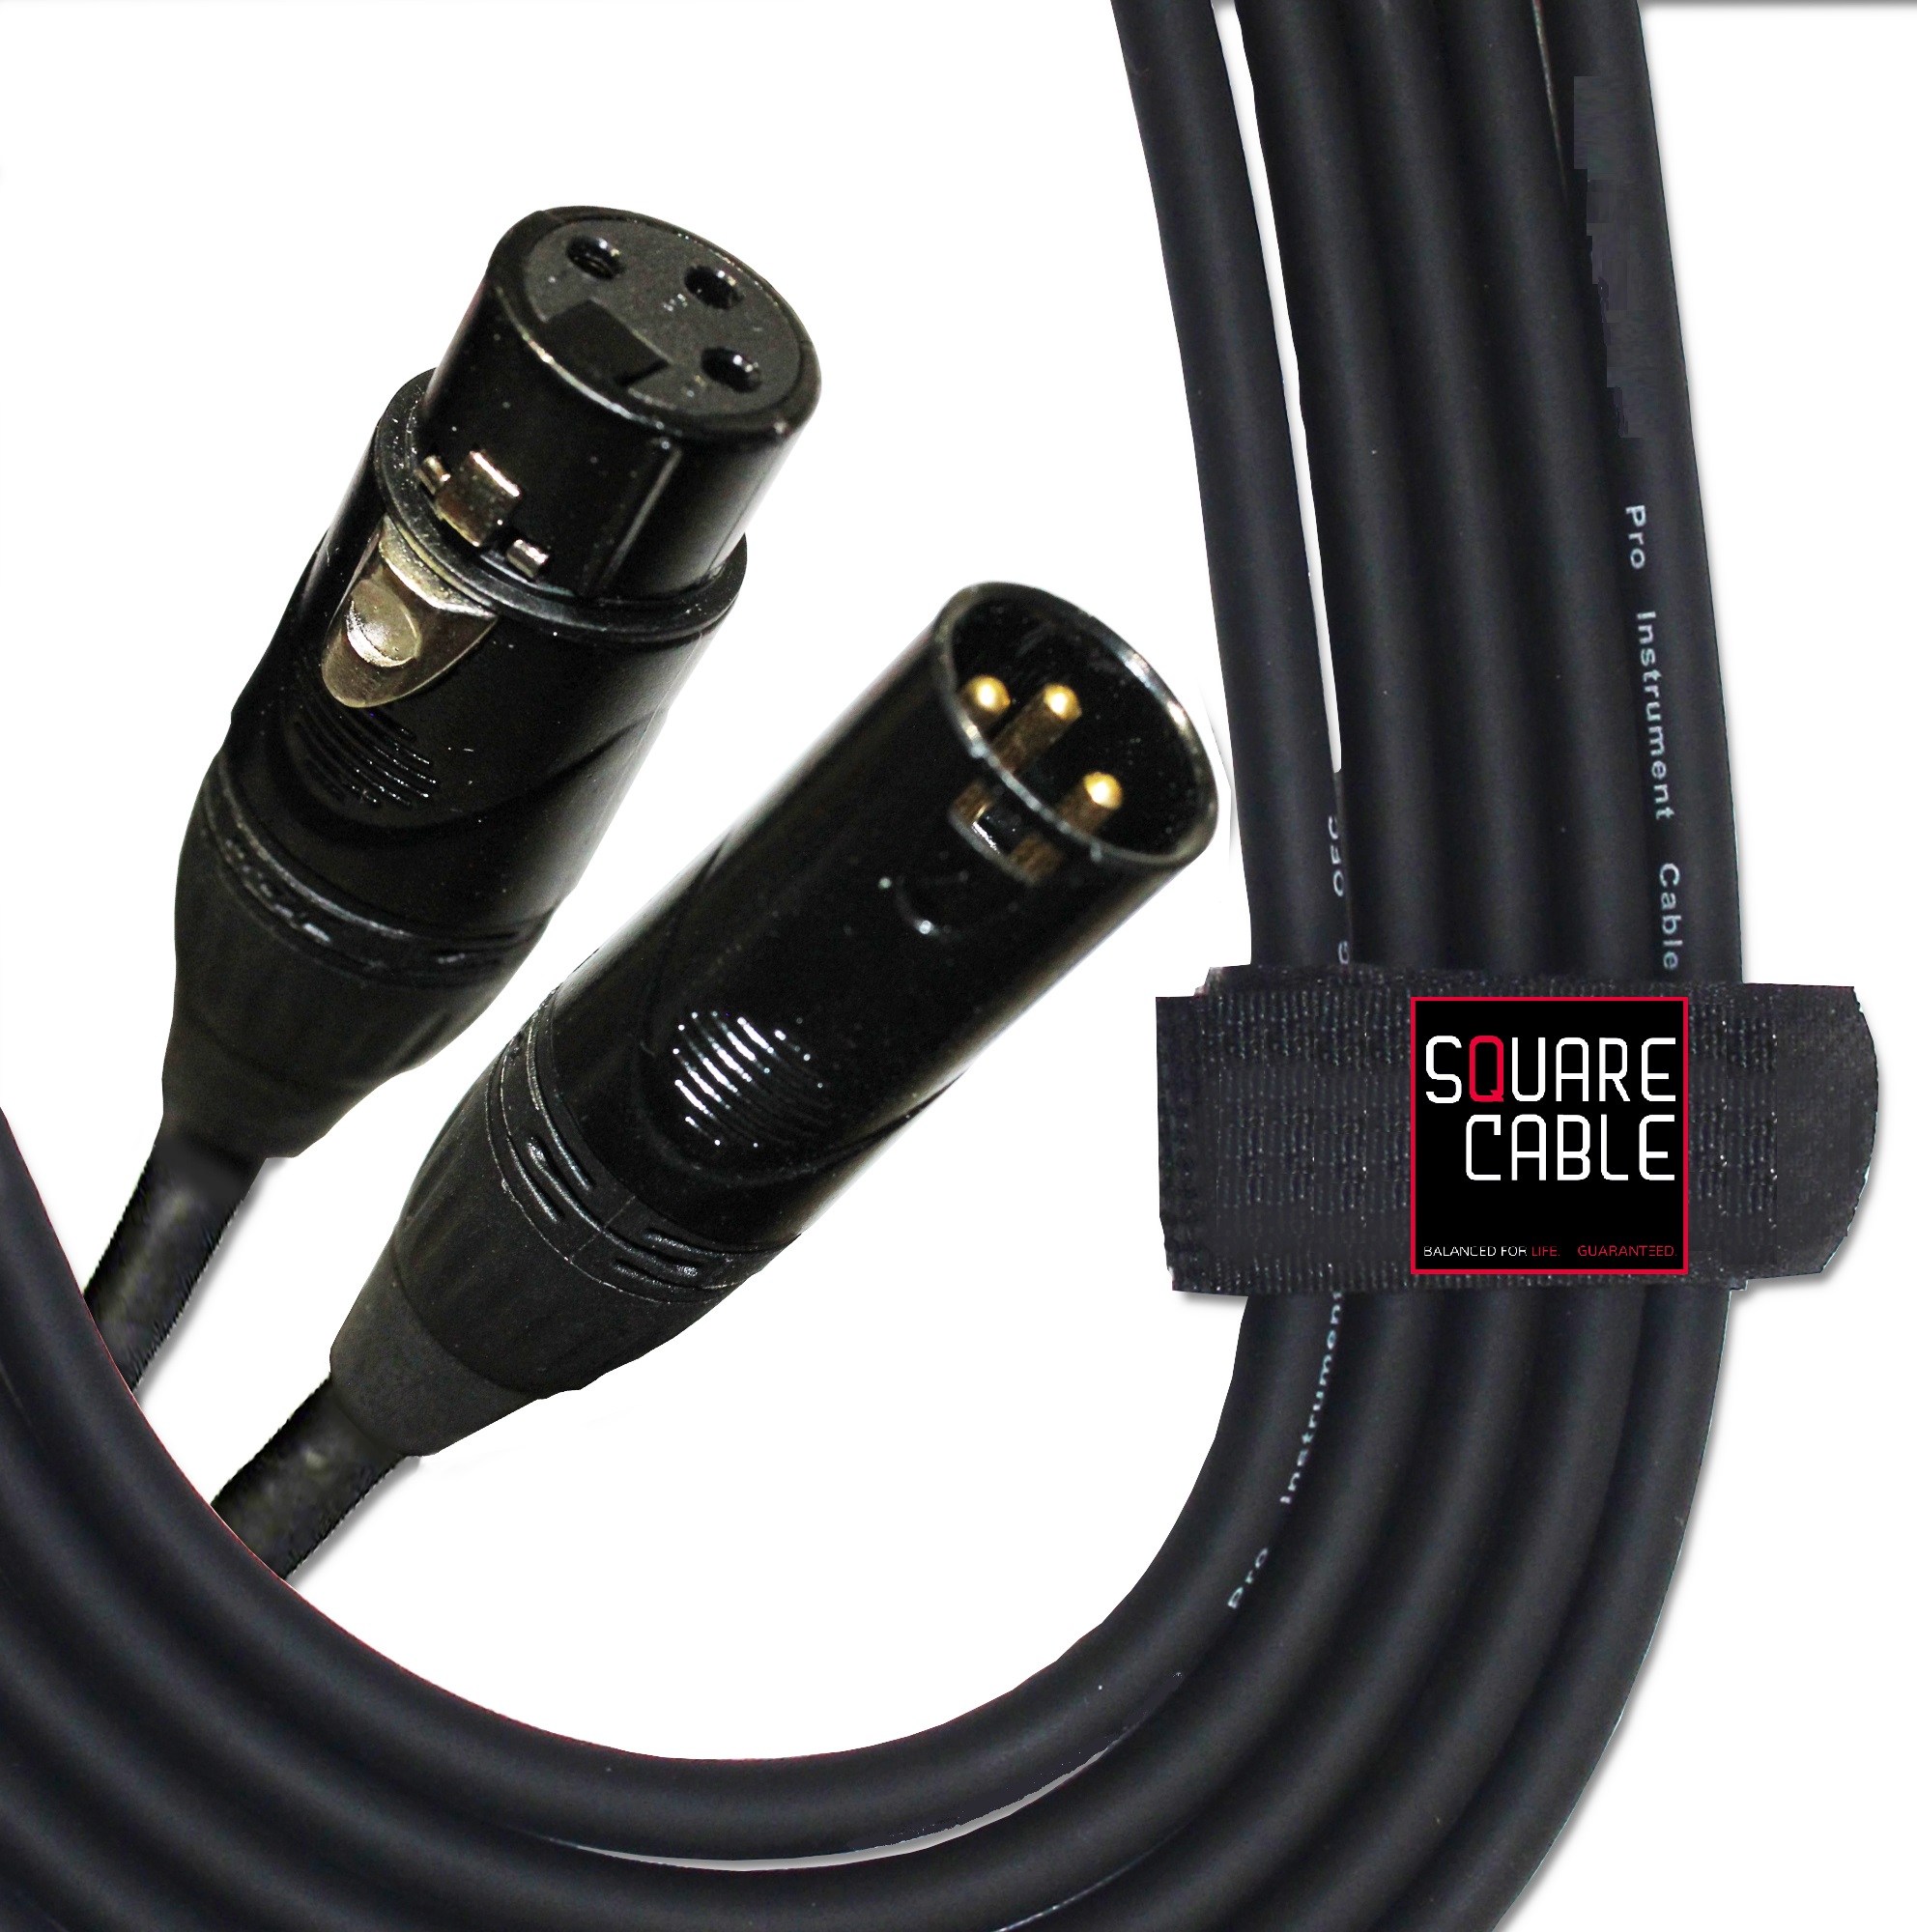 square-cable-dmx-25--25ft-dmx-cable-3-pin.jpg